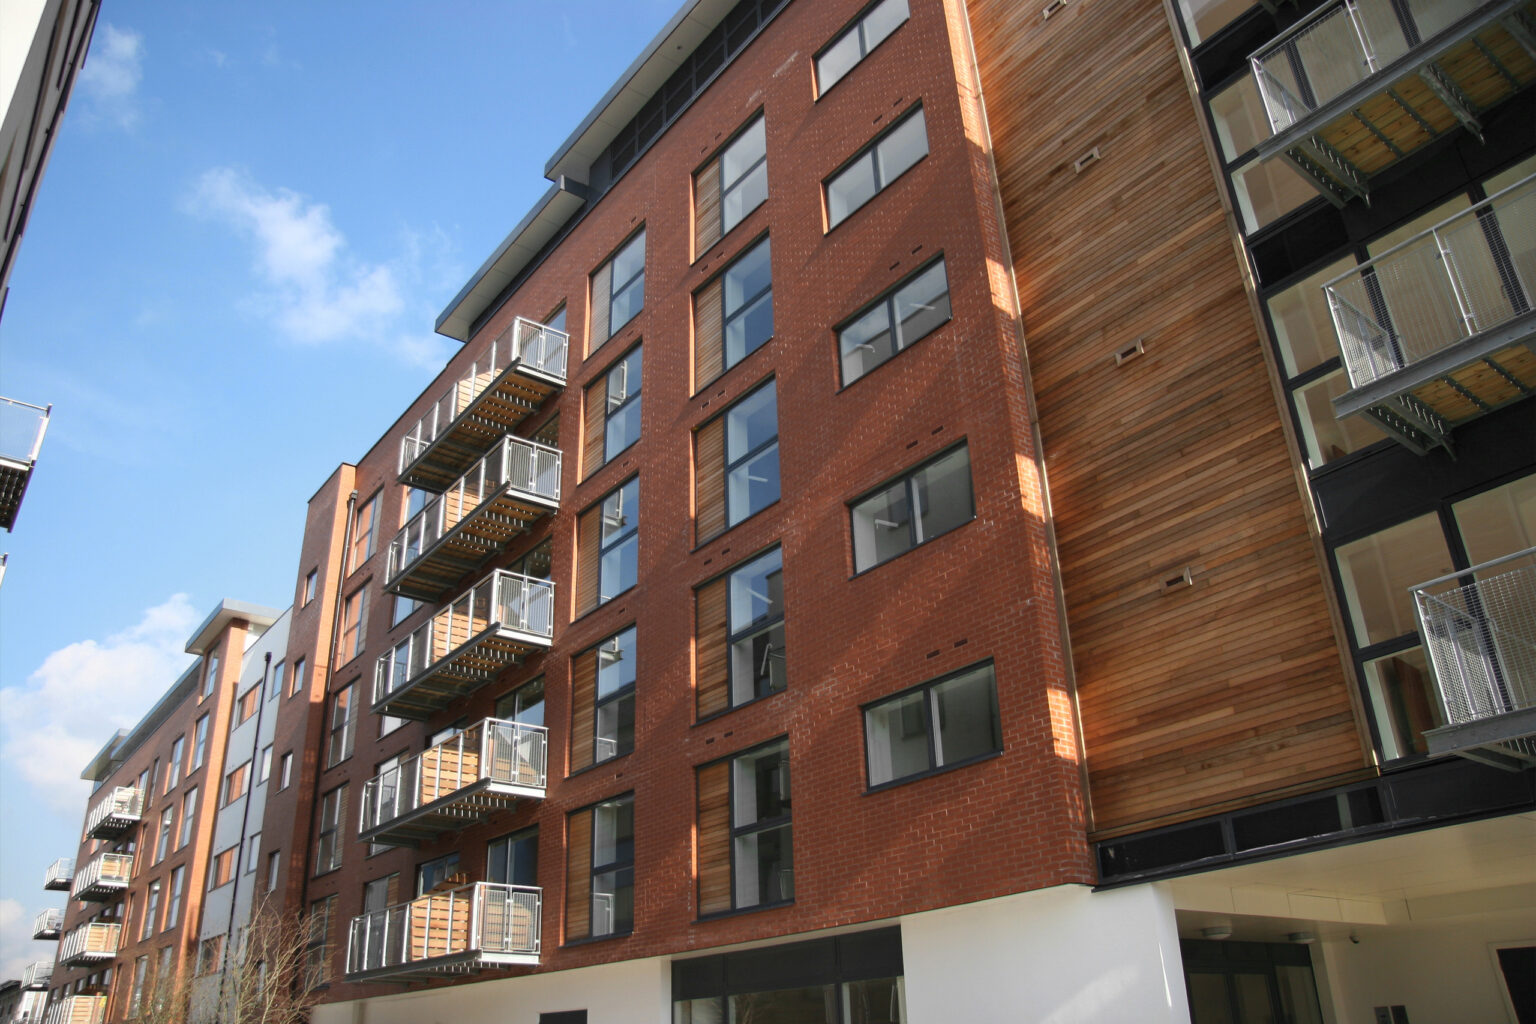 High-quality residential apartment block, typical of the types of schemes where KWB provides block management in Birmingham, delivered by their highly skilled residential management team